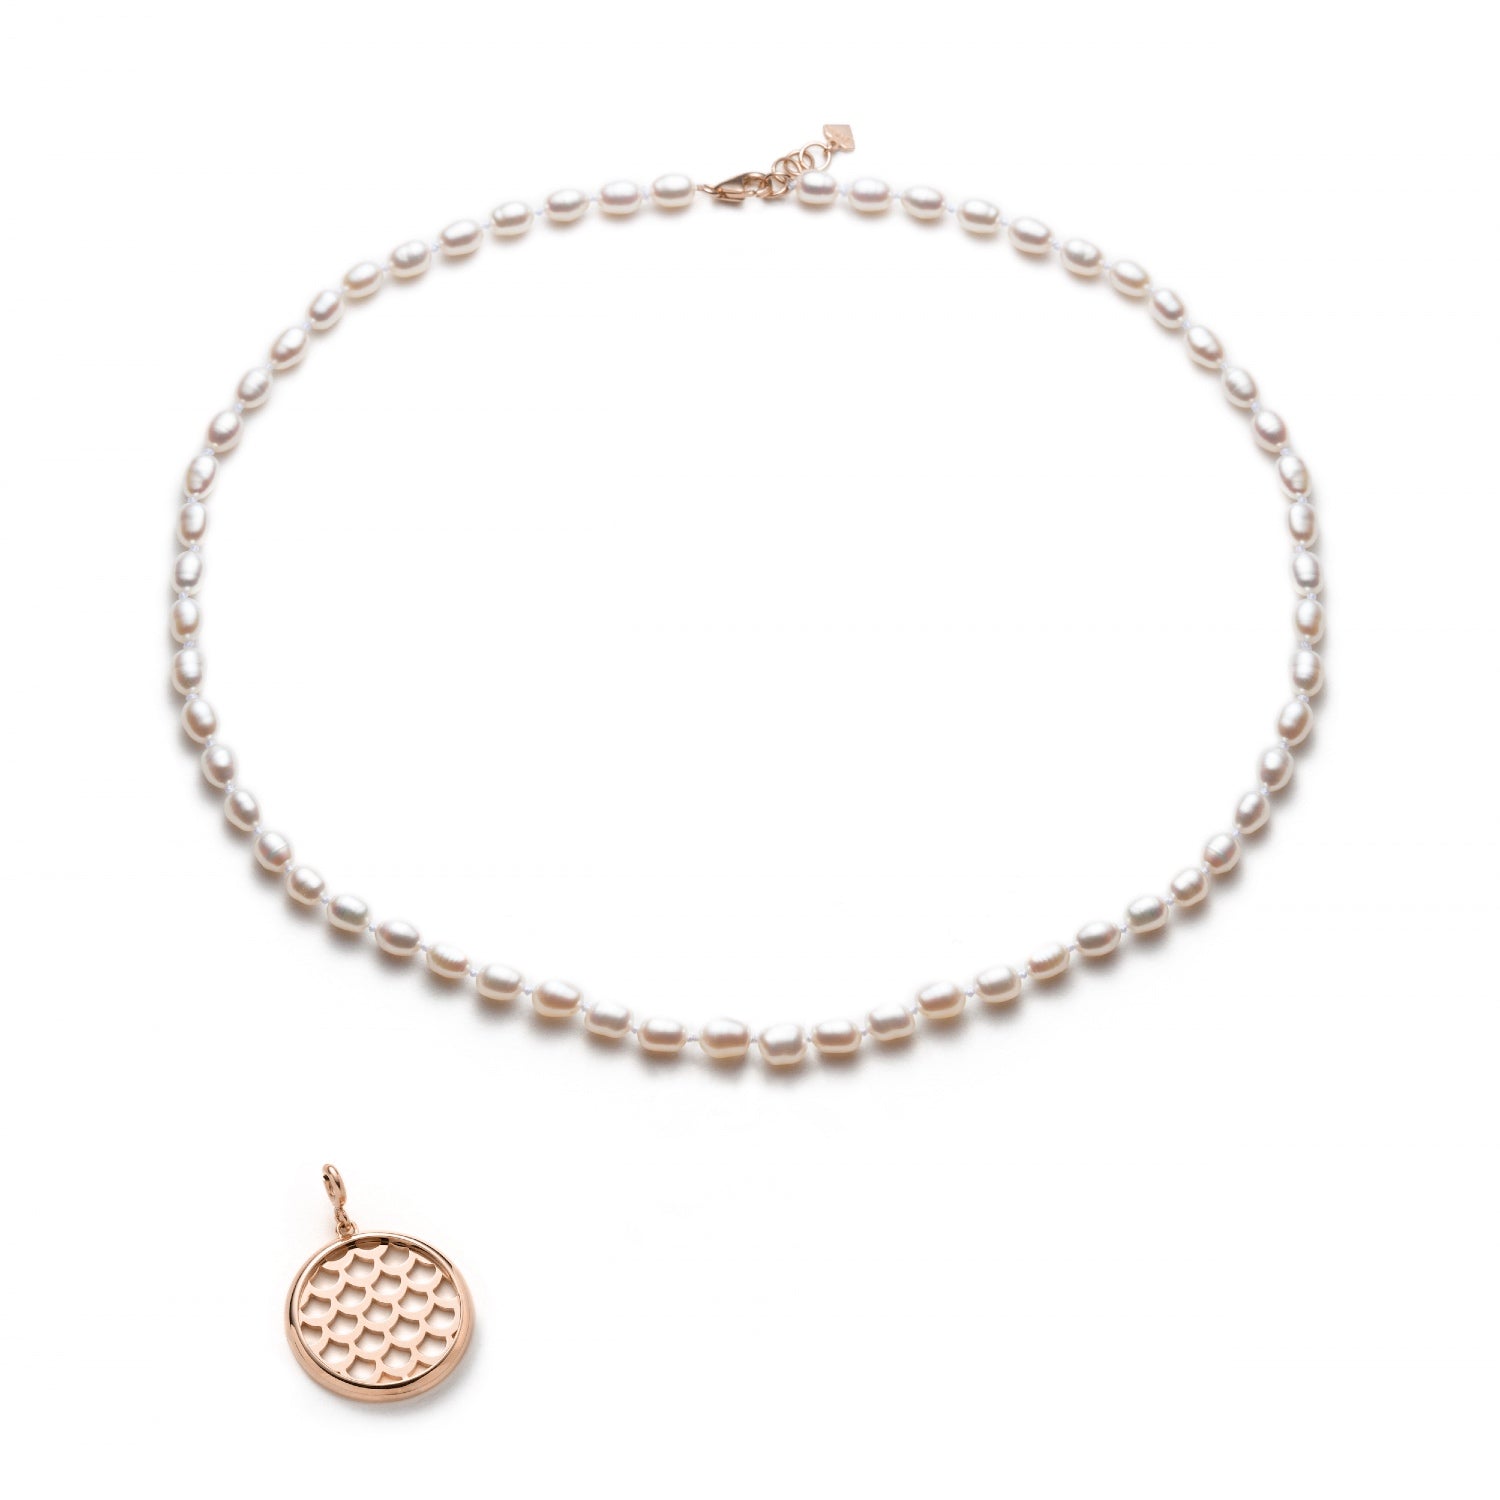 Lepia Mermaid Scales Motif Pearl Necklace in Rose Gold